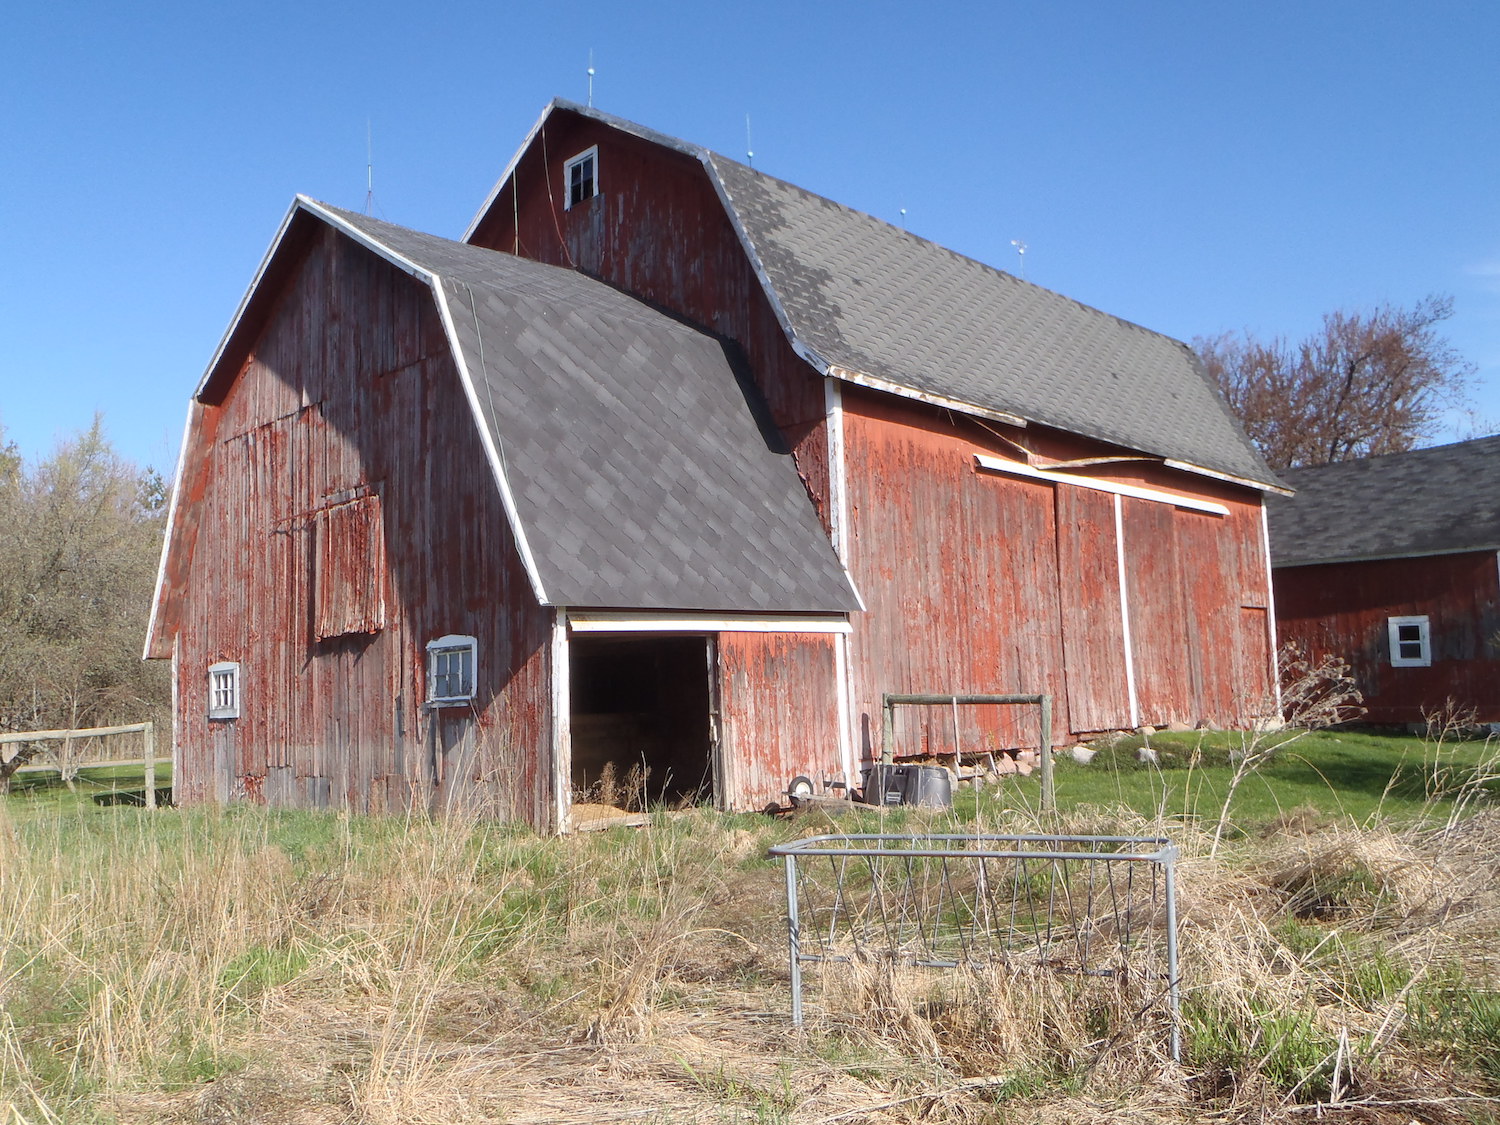 An old, red barn that was standing in Grand Ledge, MI